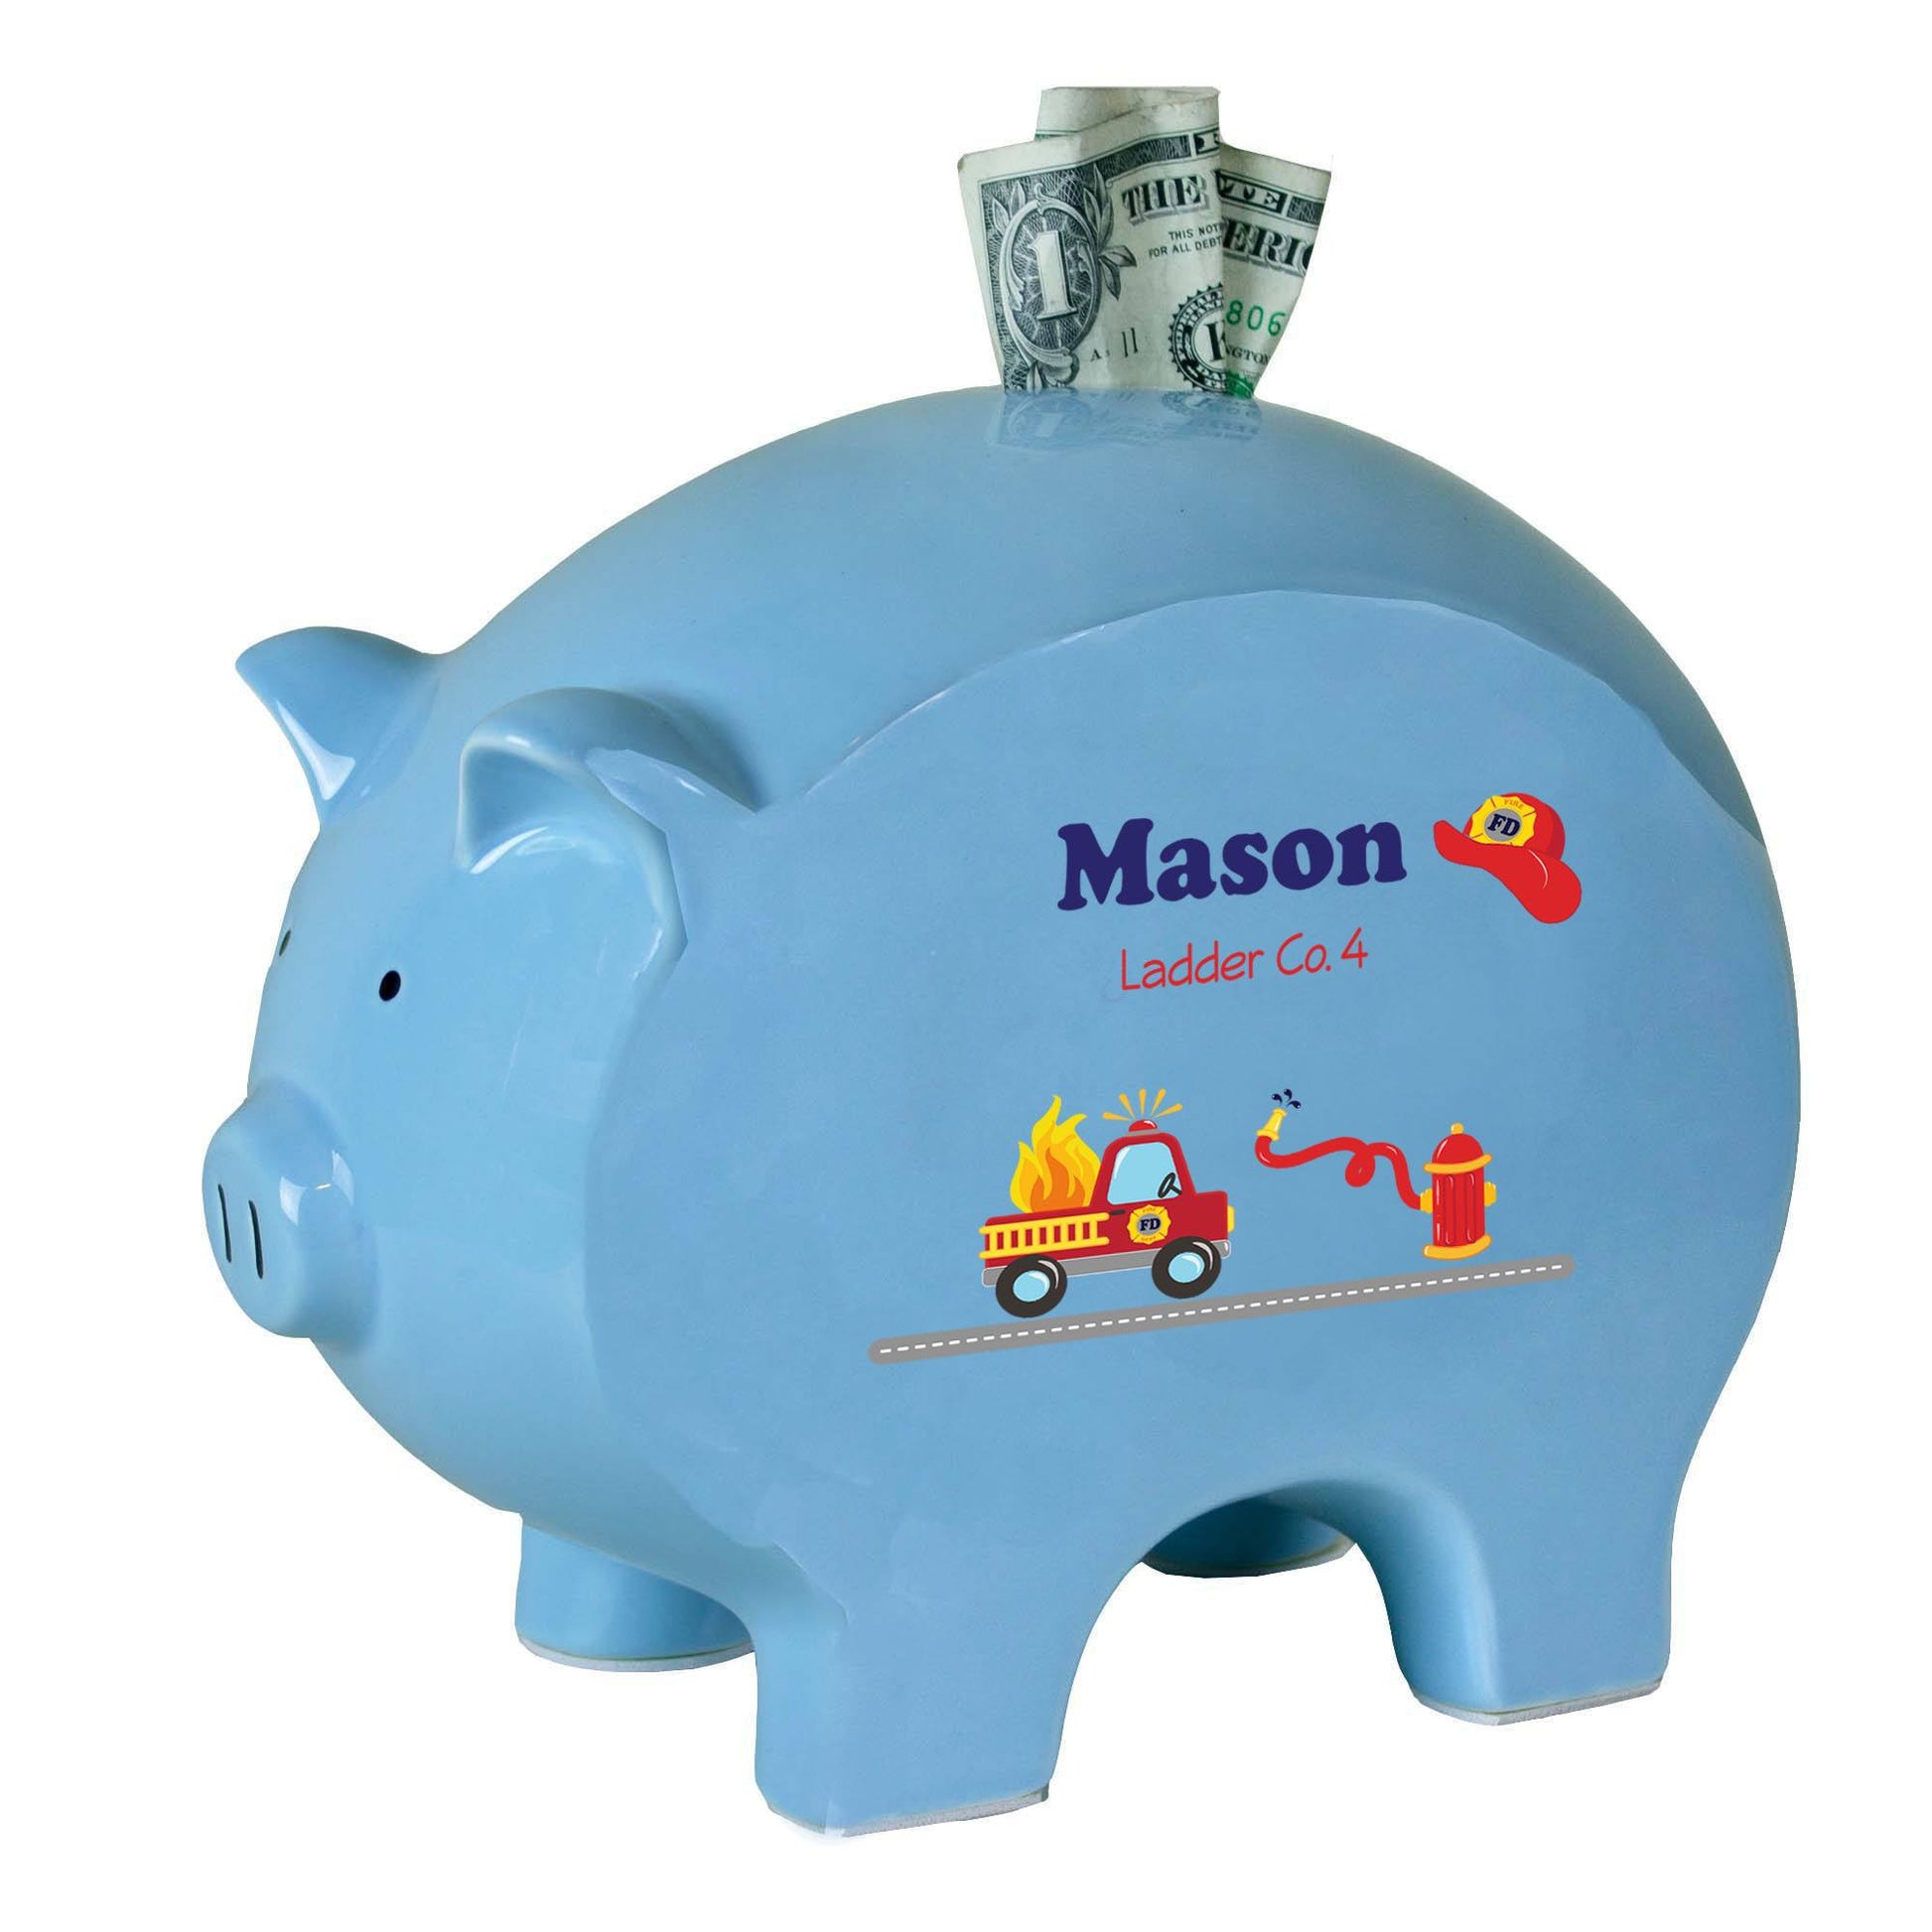 Personalized Blue Piggy Bank with Fire Truck design